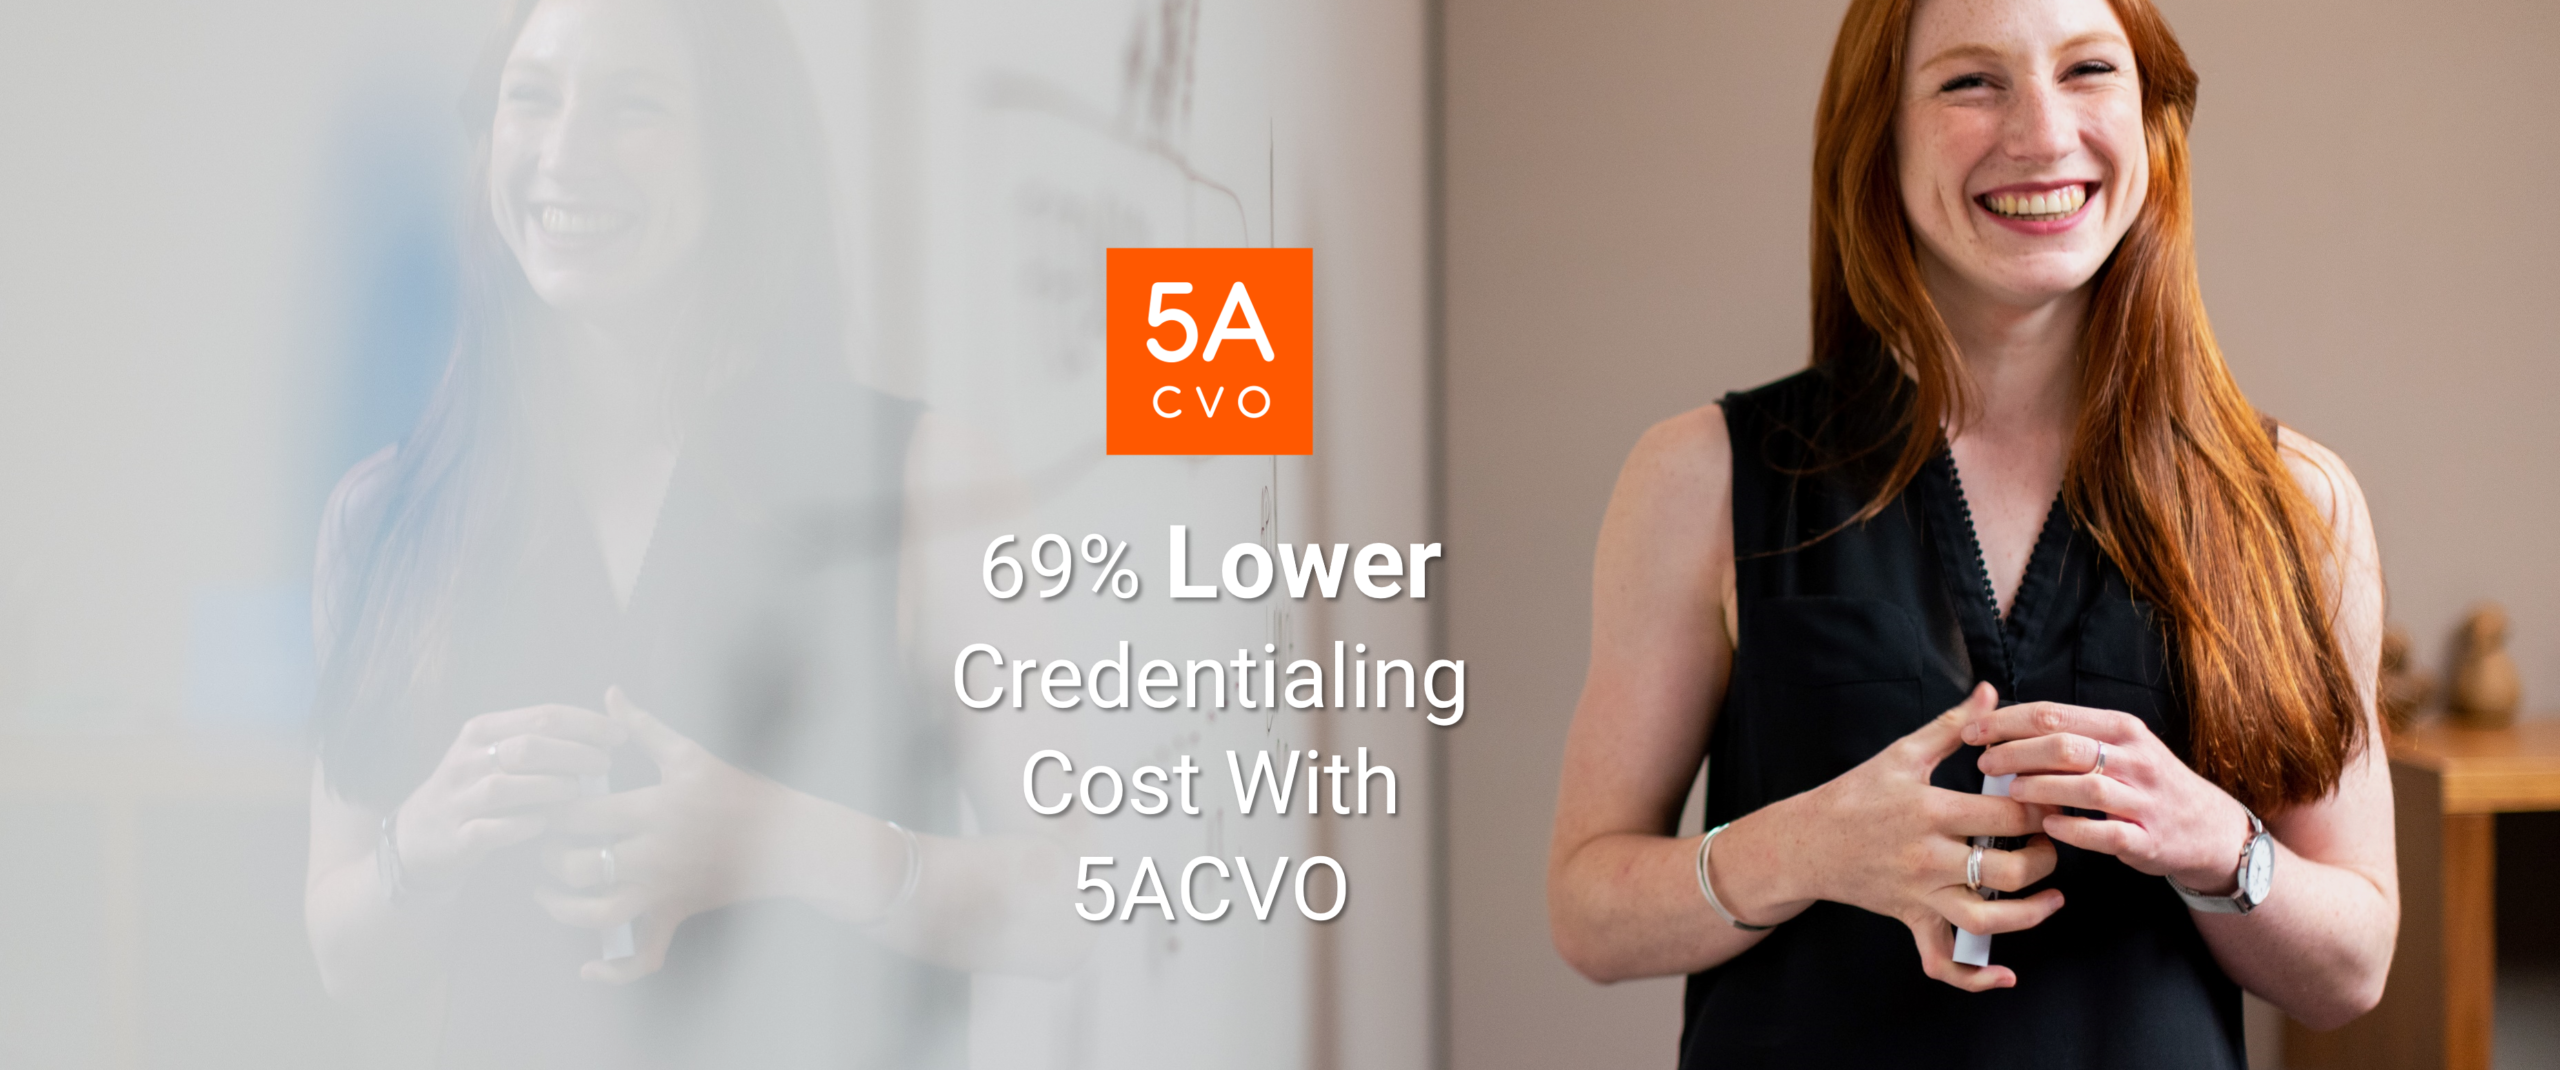 Lower Credentialing Cost With 5ACVO